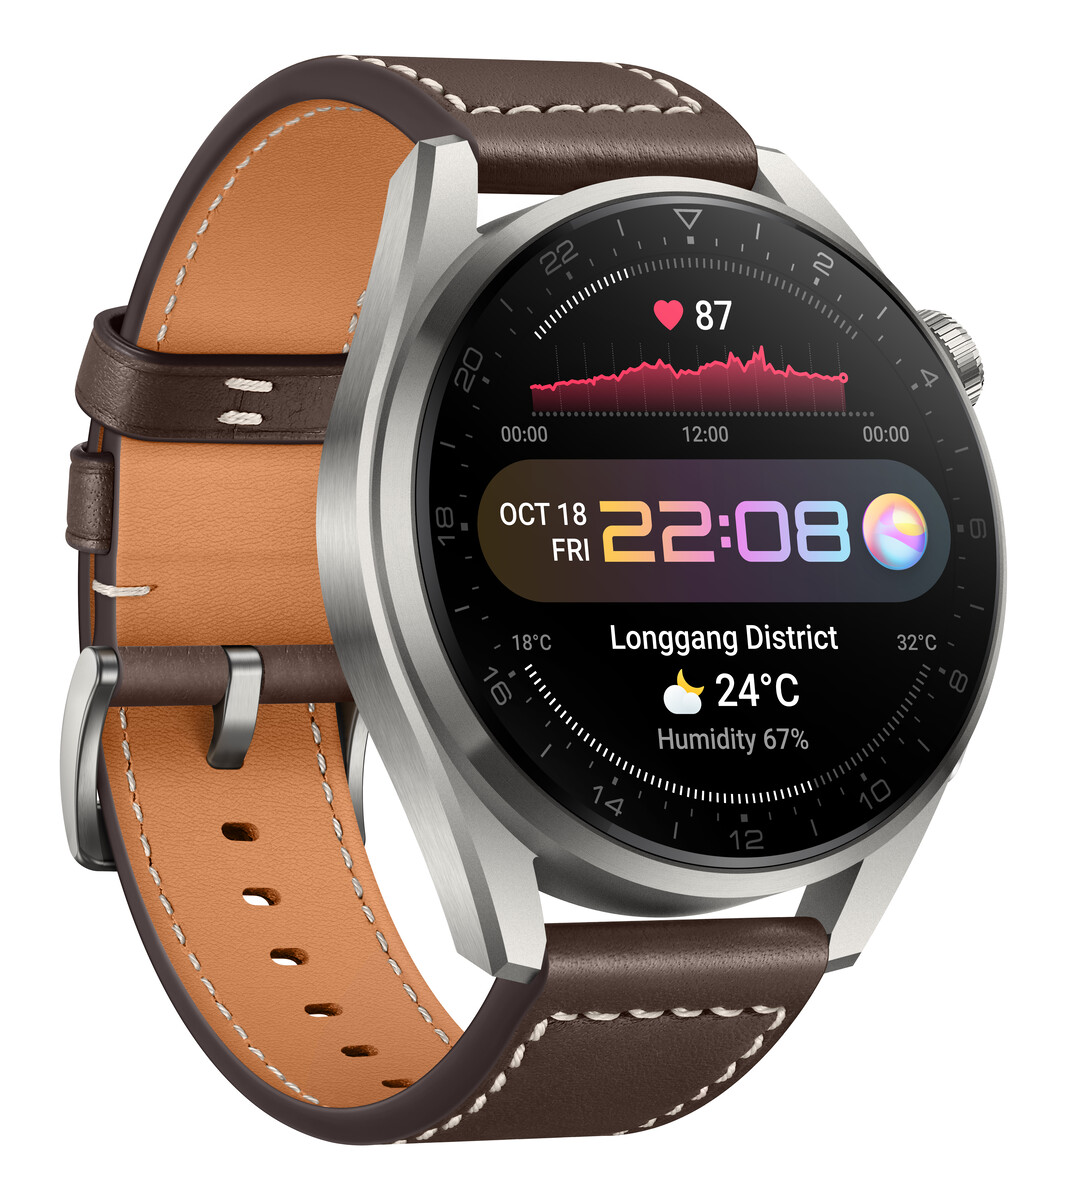 Huawei officially unveils the Watch 3 and 3 Pro: new 4G/LTE-enabled